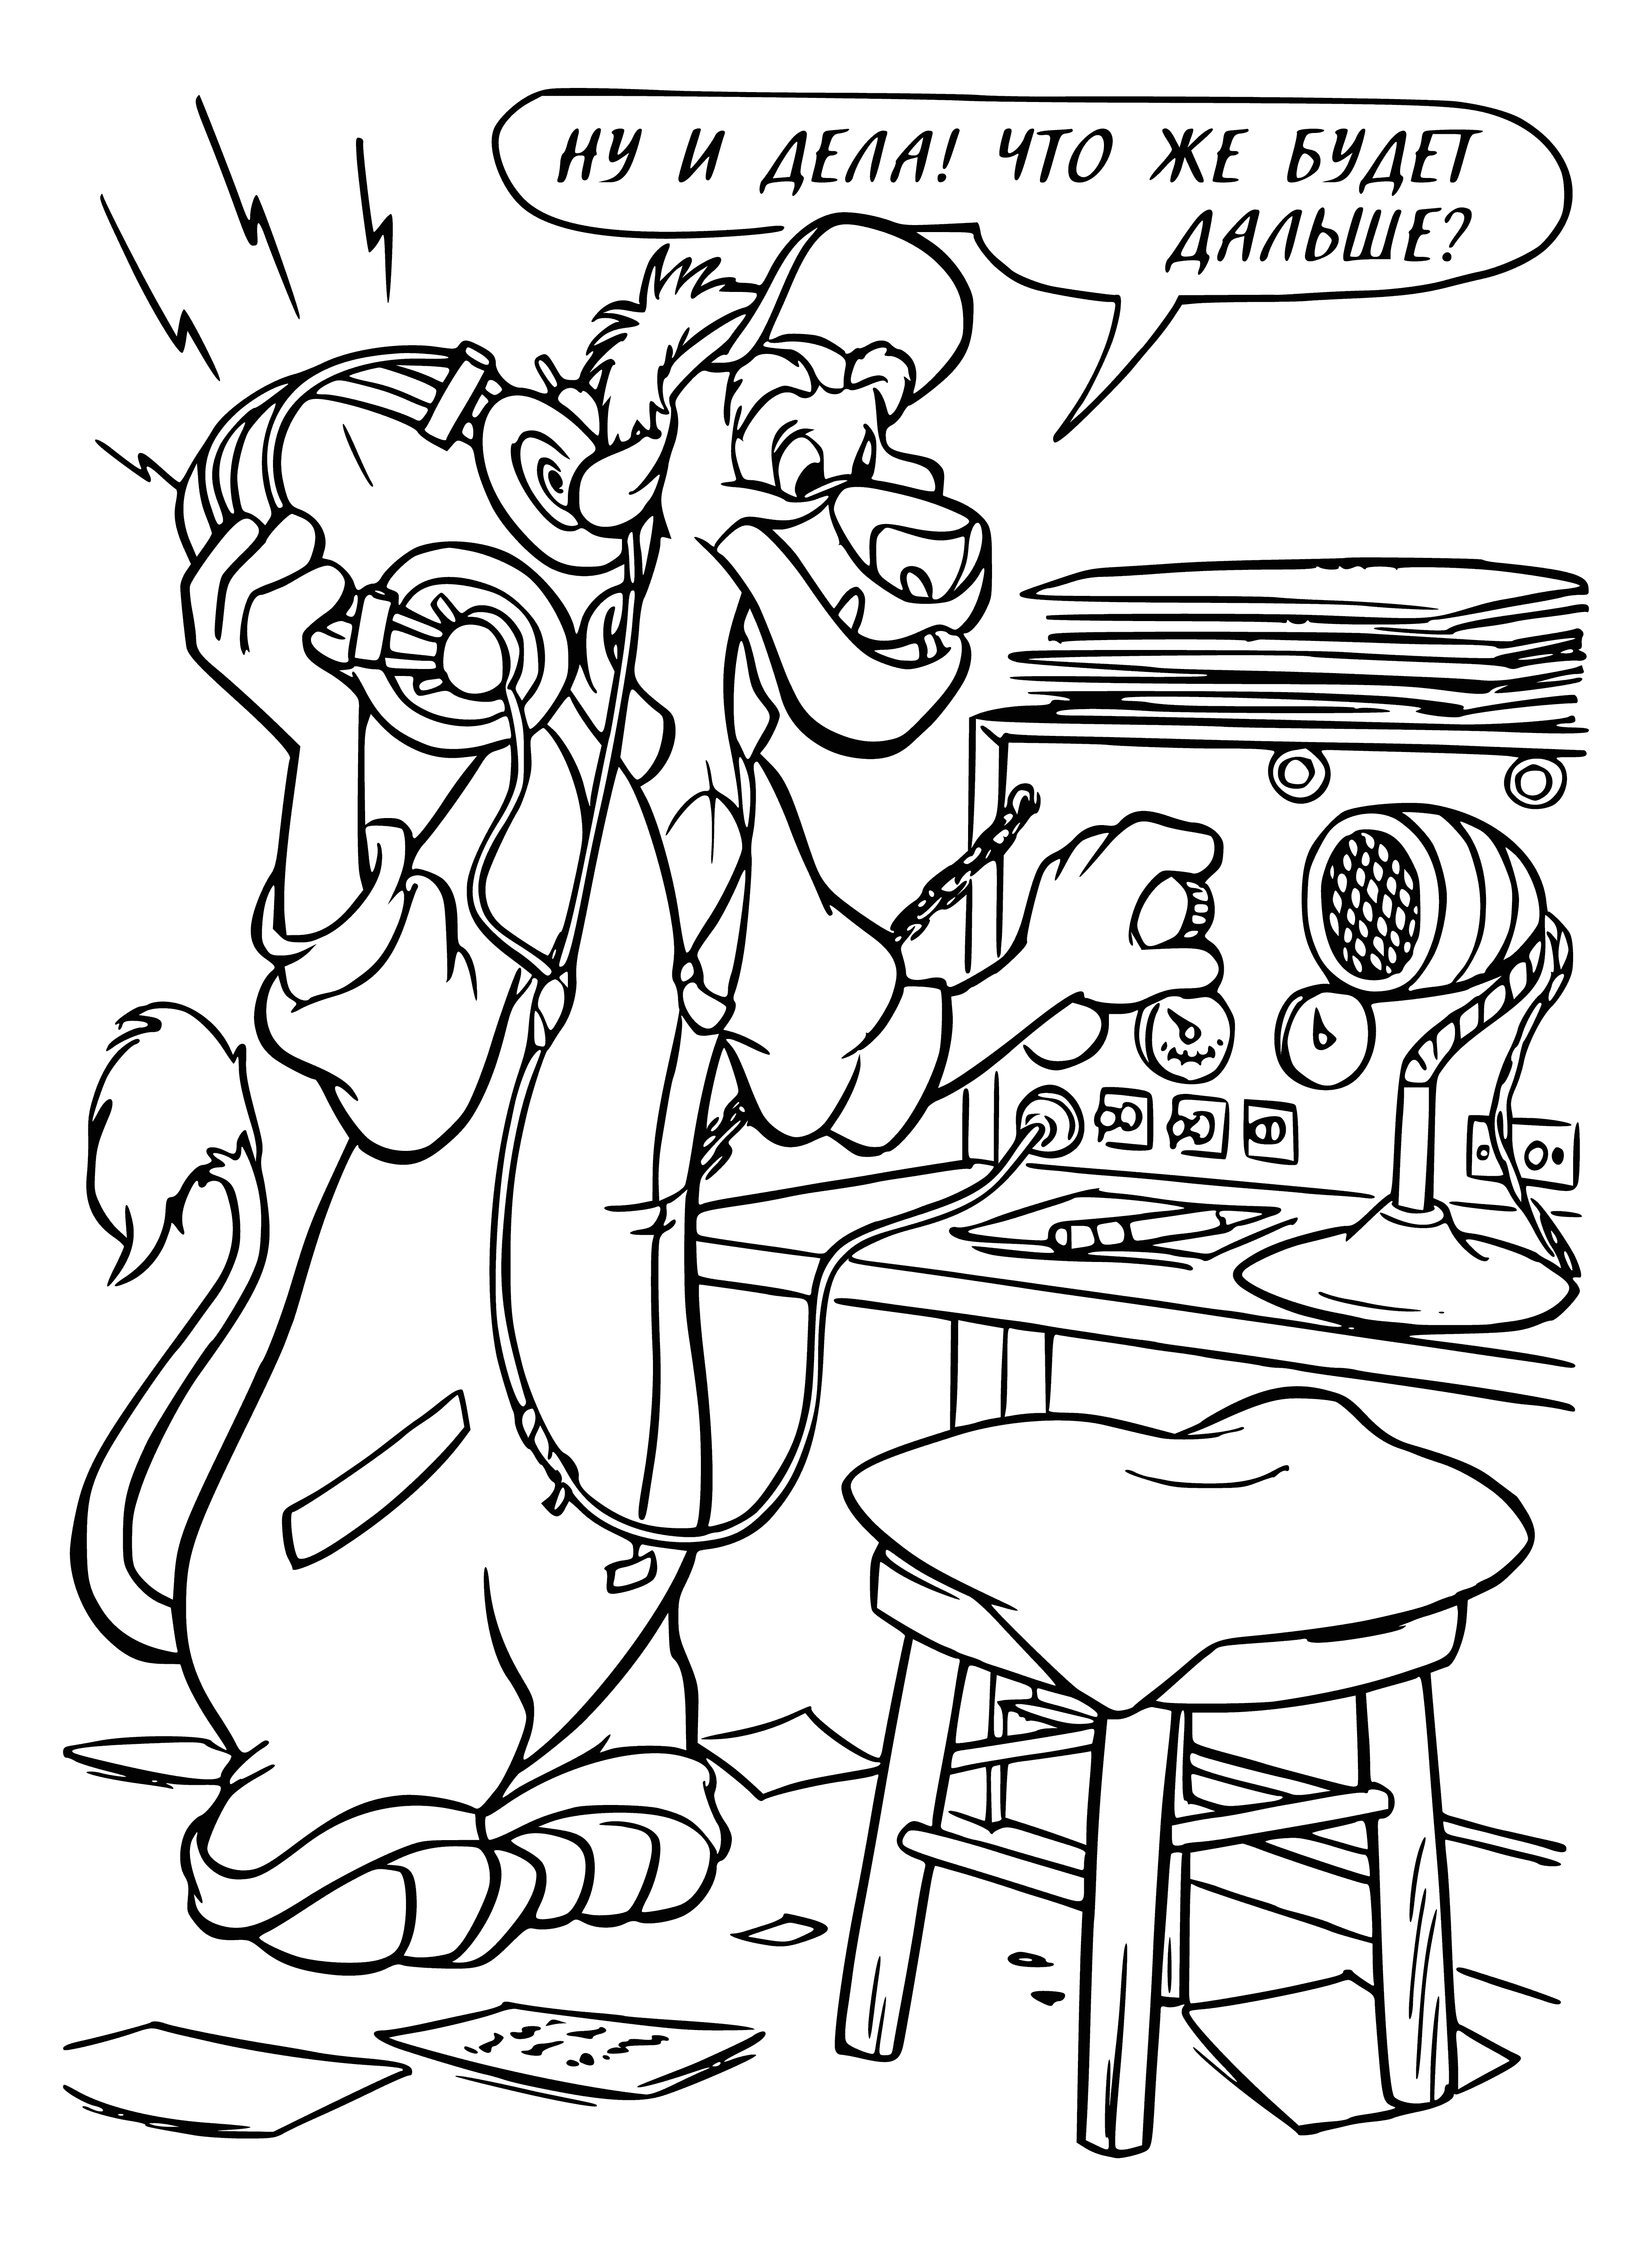 Balamut listens to the radio coloring page